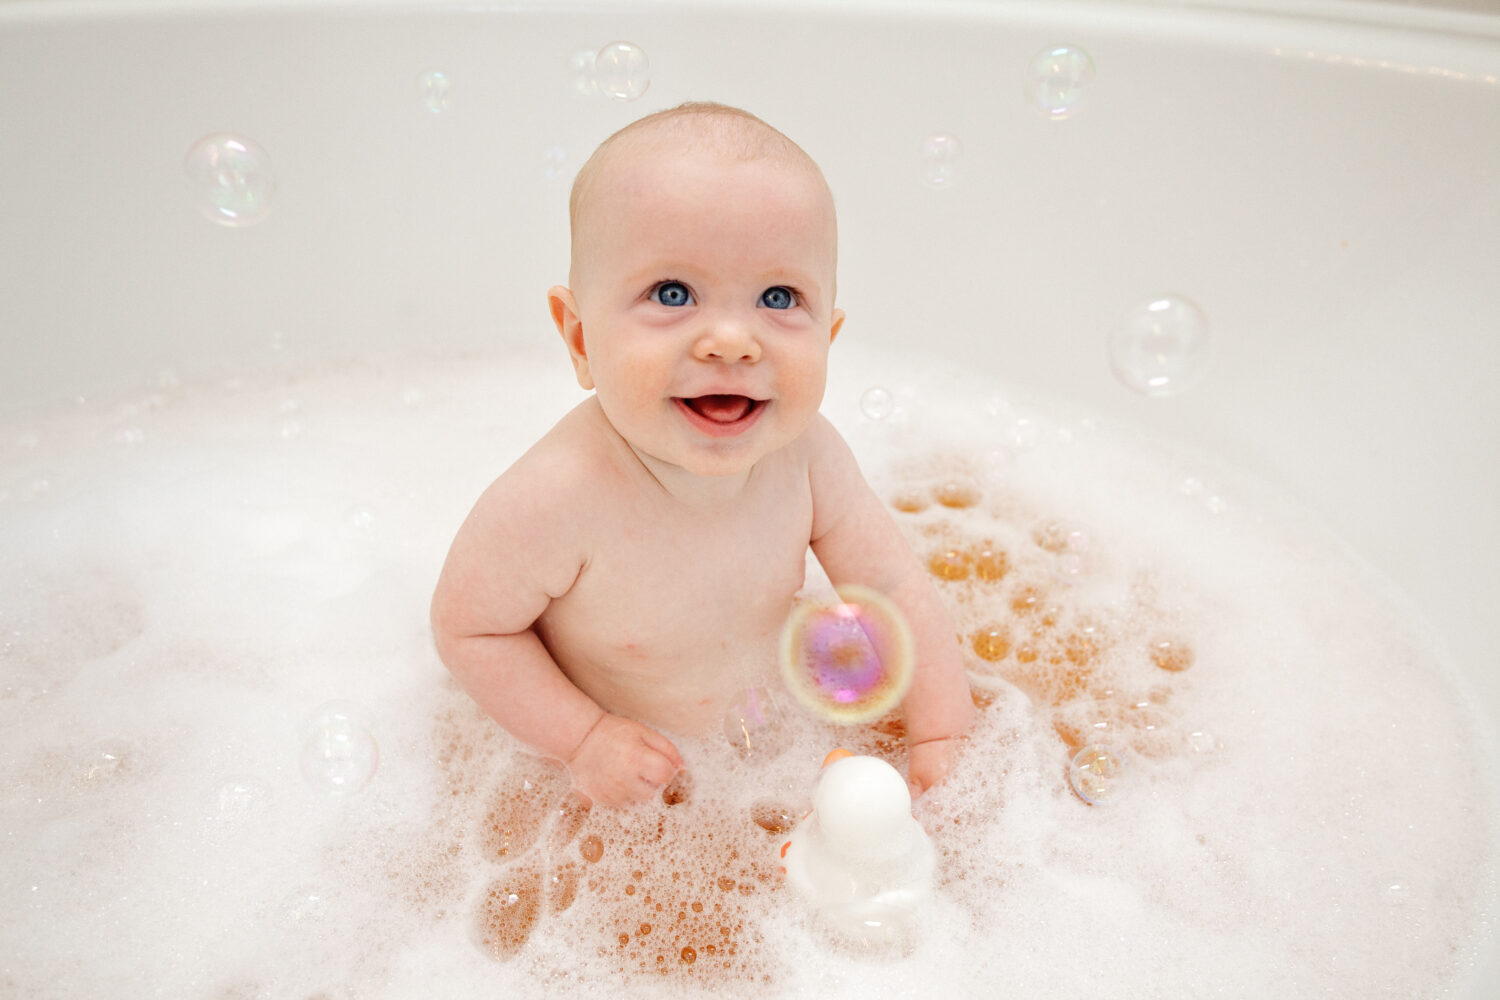 smiling baby in tub